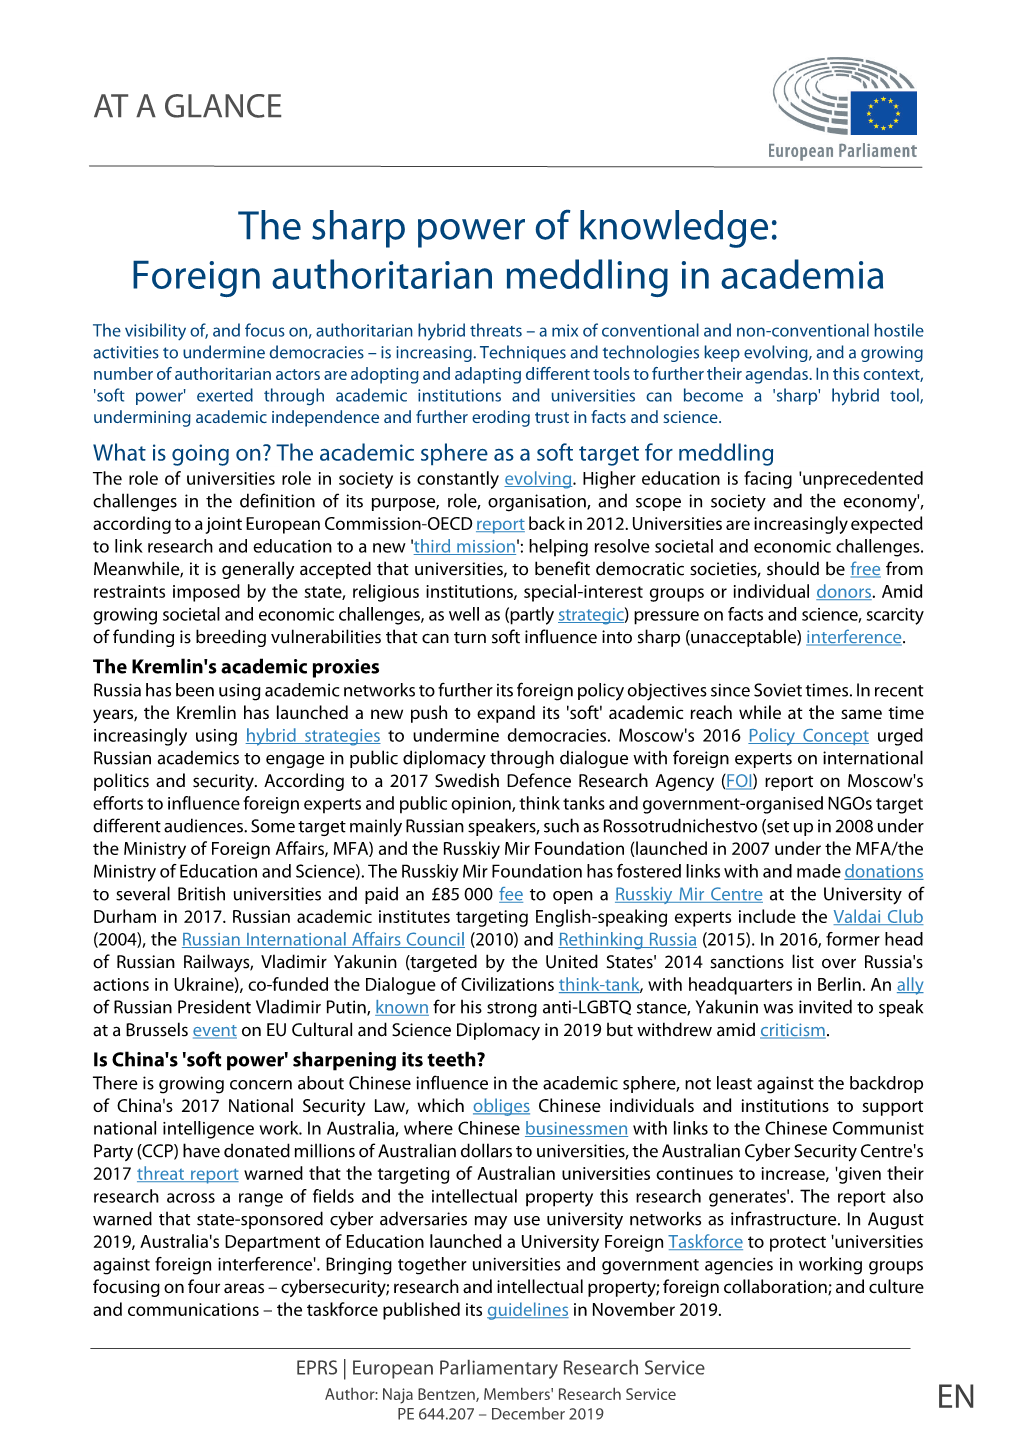 The Sharp Power of Knowledge: Foreign Authoritarian Meddling in Academia